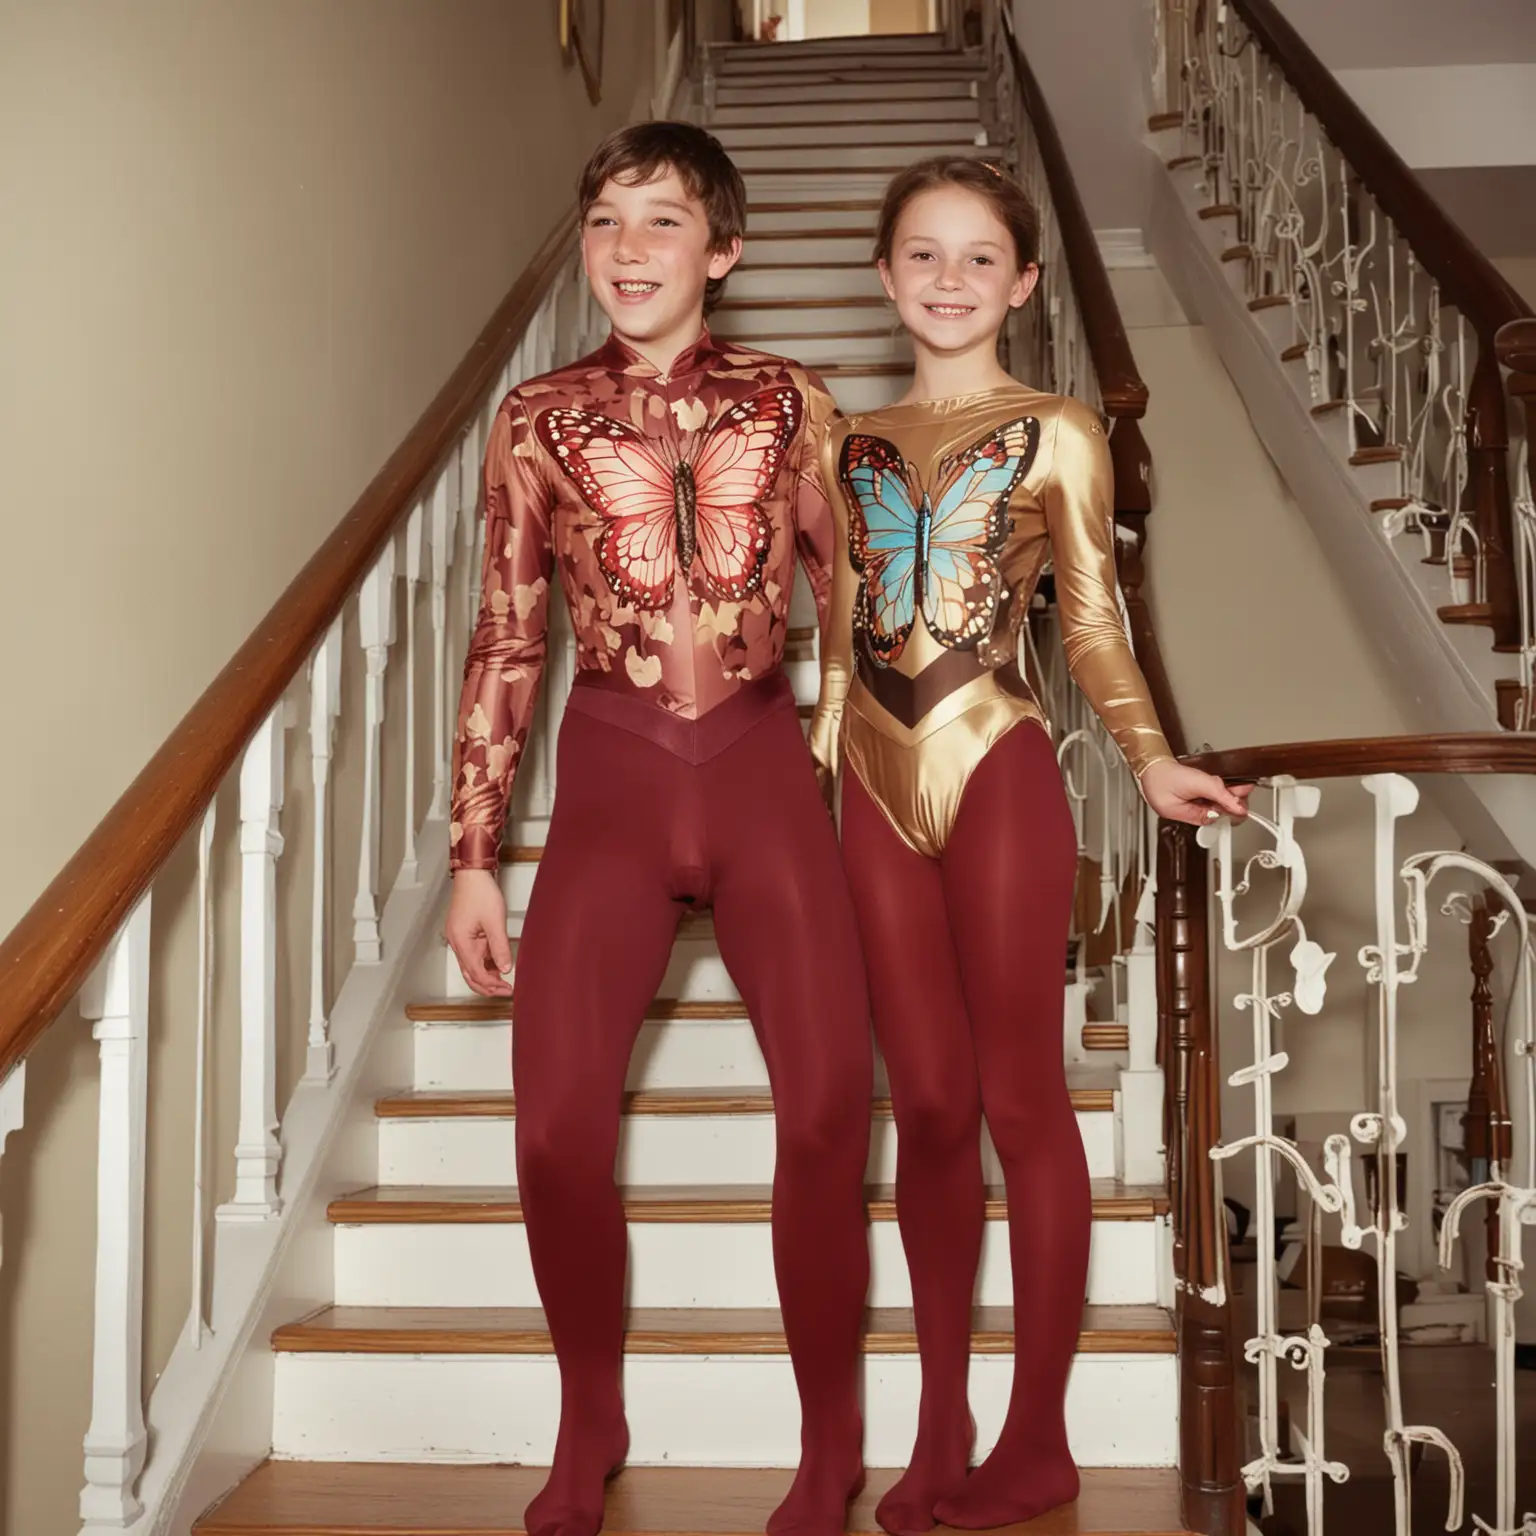 boy age:16 with woman age:19, various butterfly costumes with maroon tights and long sleeved leotards, walking down stairs in home, smiling